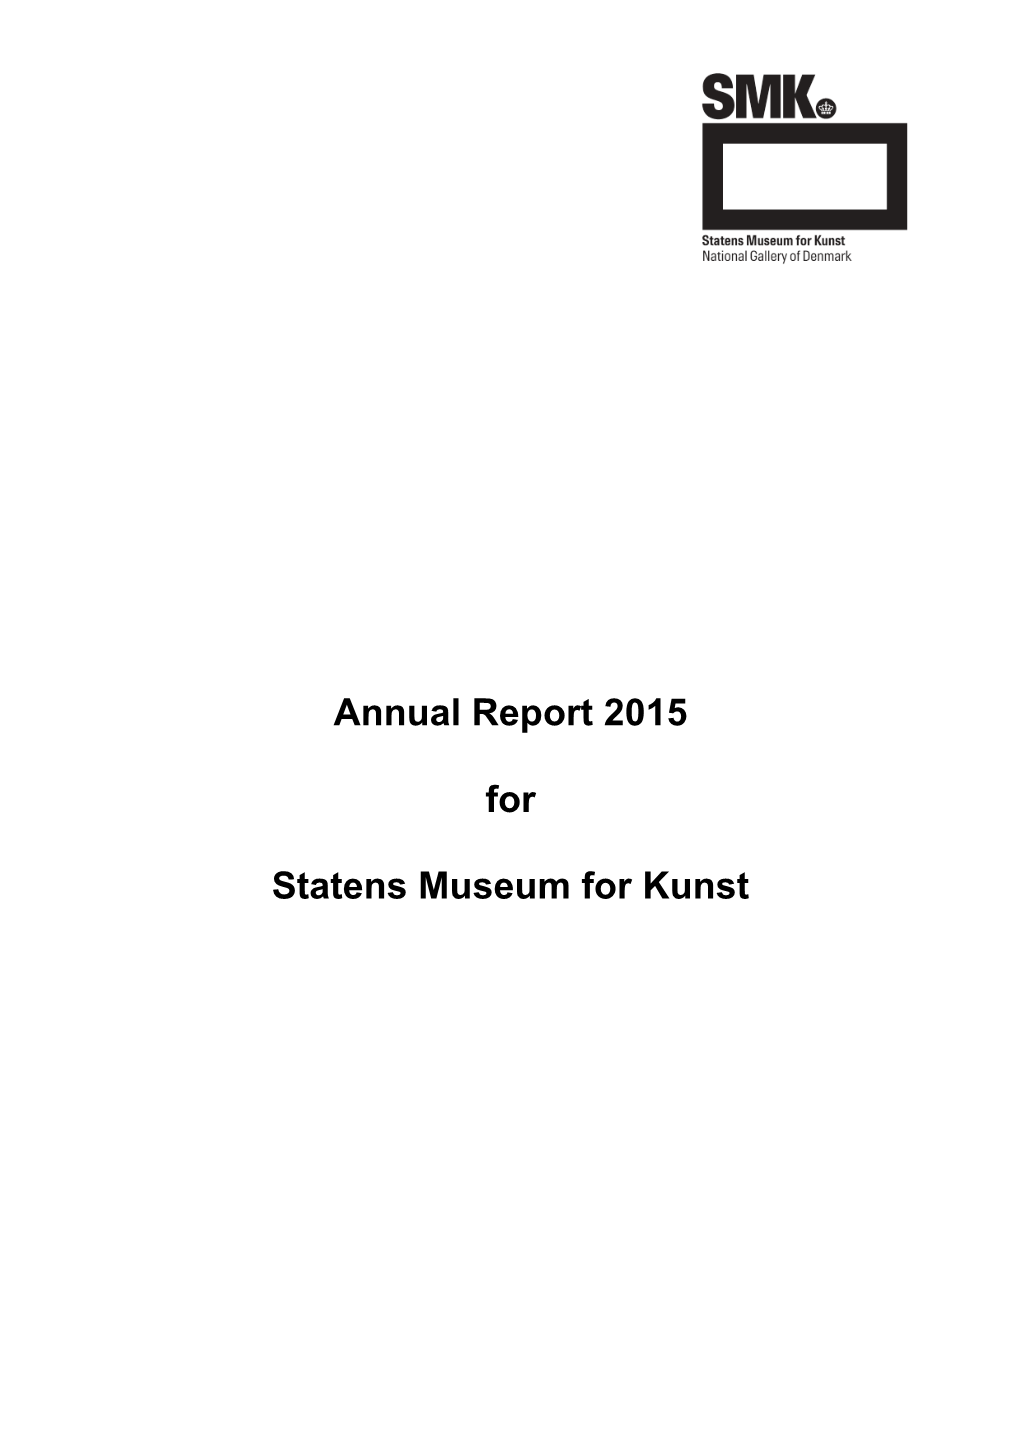 Annual Report 2015 for Statens Museum for Kunst